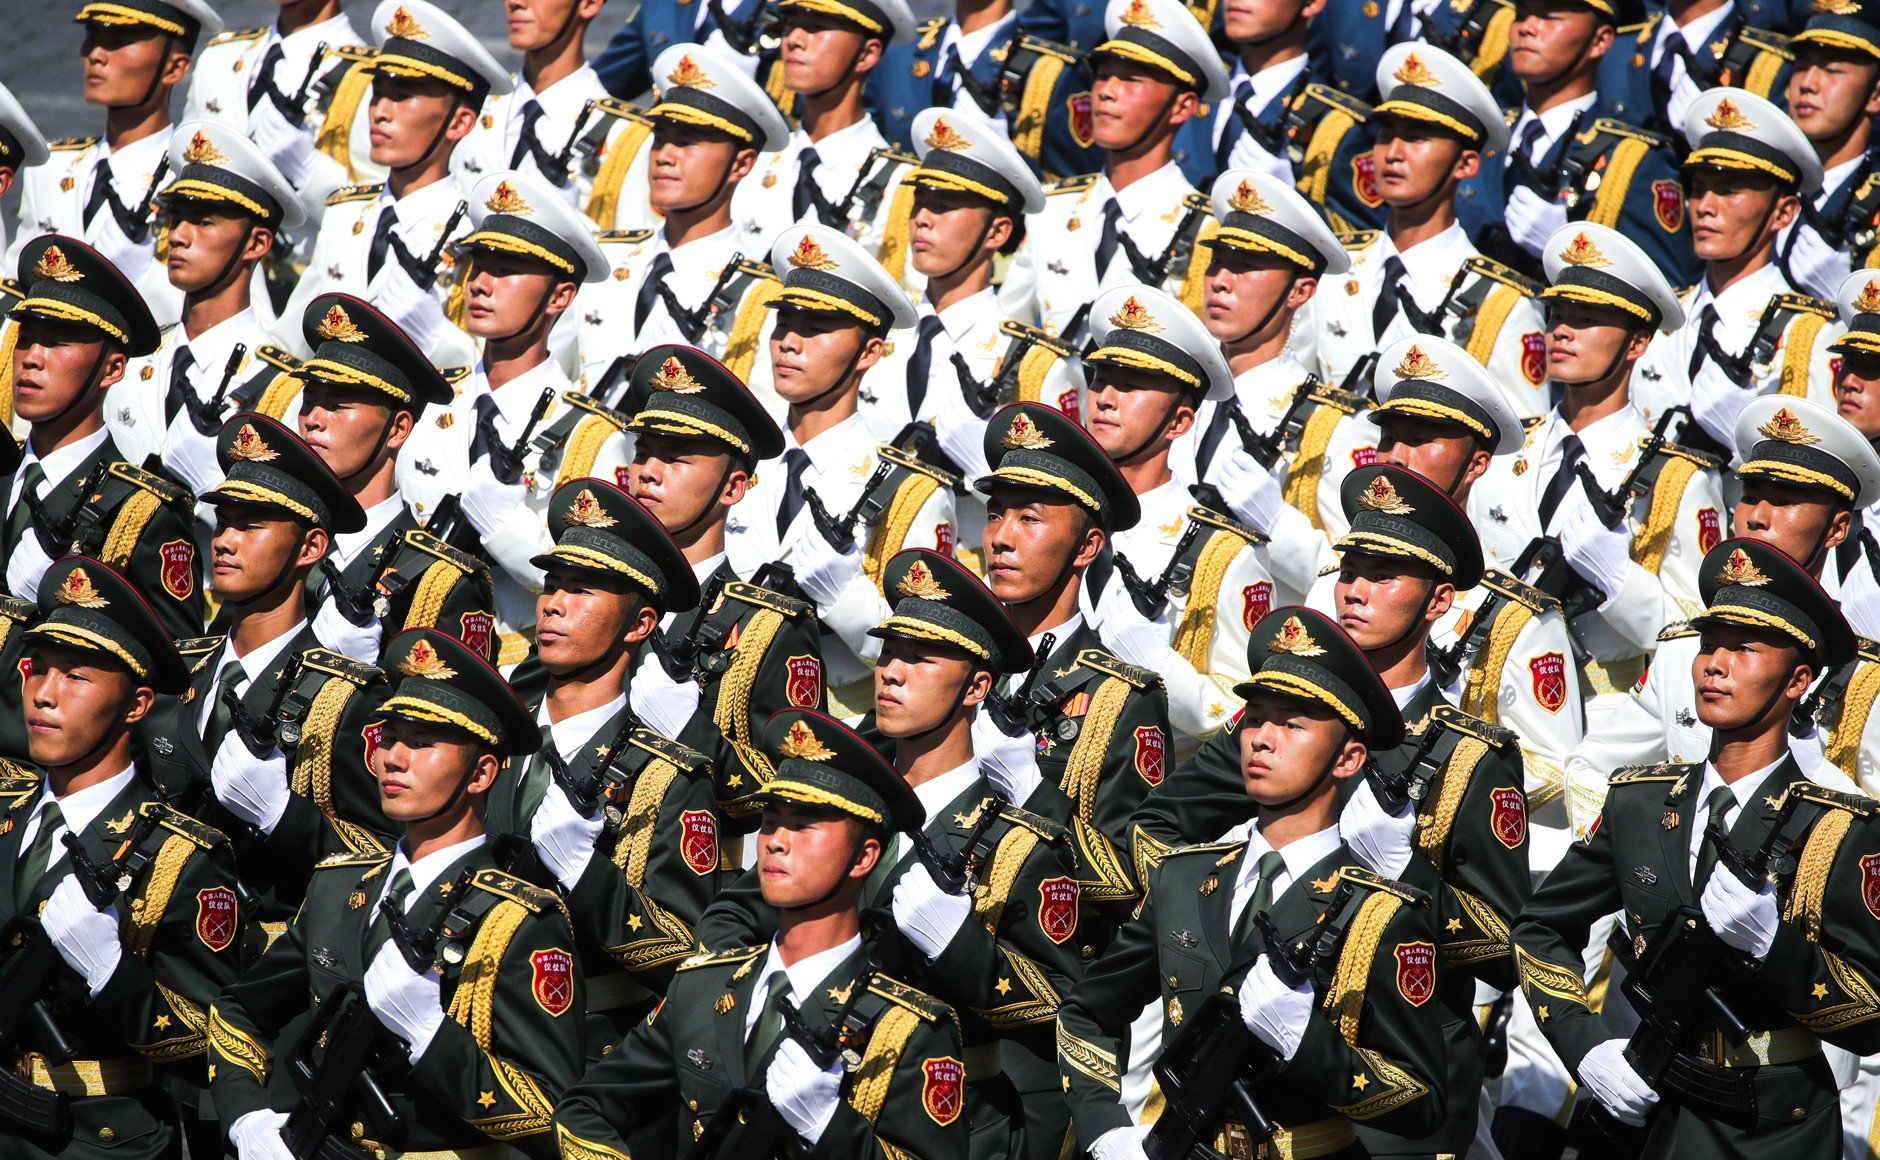 Chinese troops, China technology, Coffee or Die